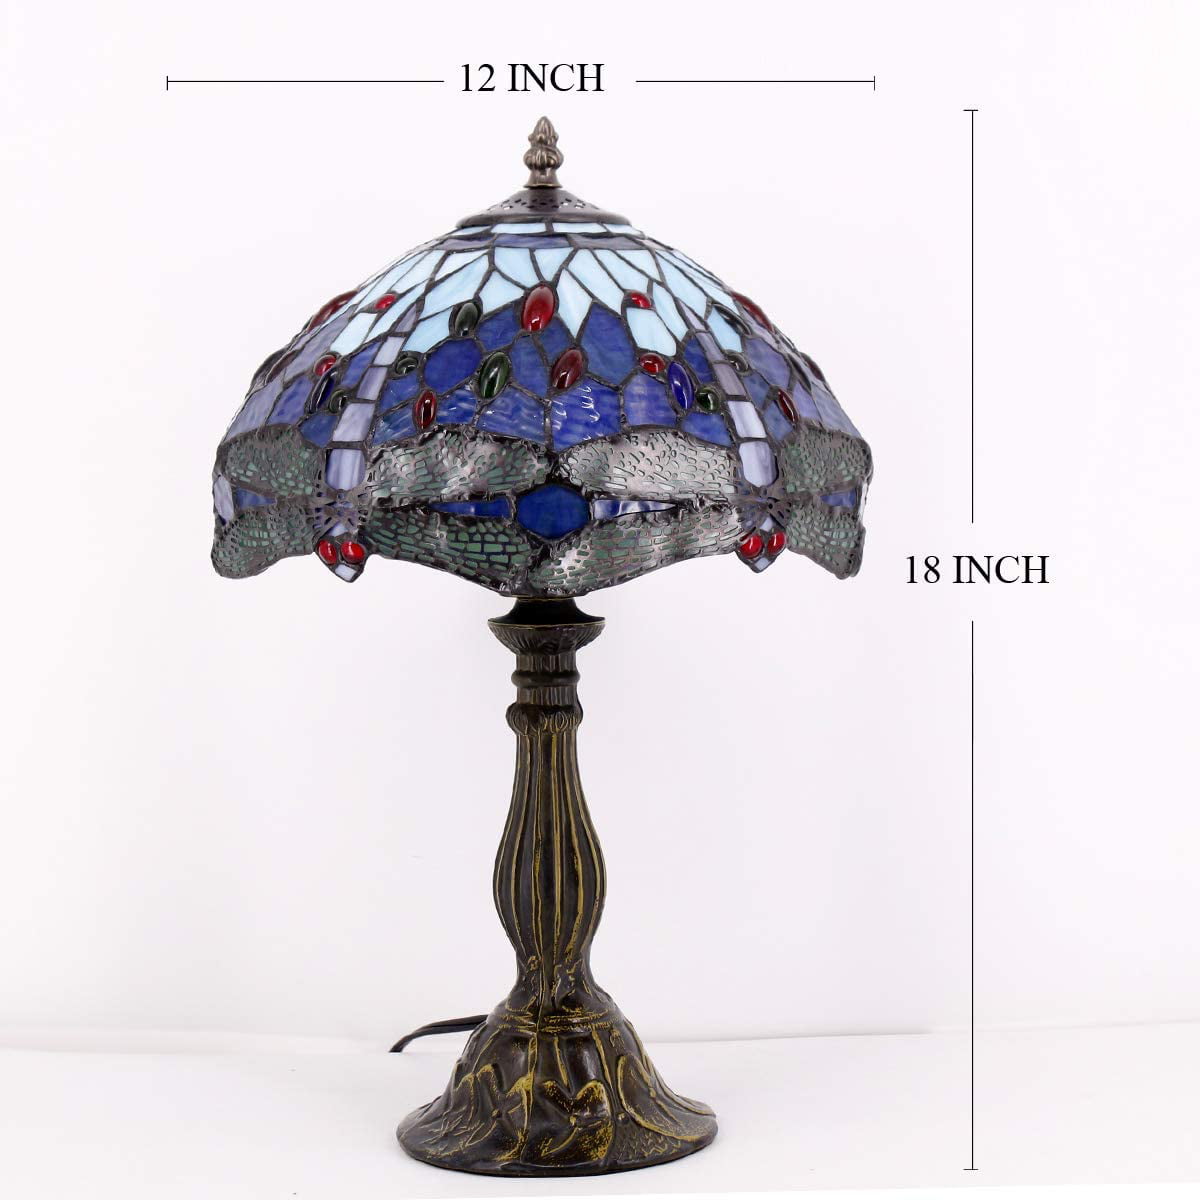 SHADY  Table Lamp Blue Stained Glass Dragonfly Style Bedside Desk Reading Light 12X12X18 Inches Decor Bedroom Living Room Home Office S004 Series